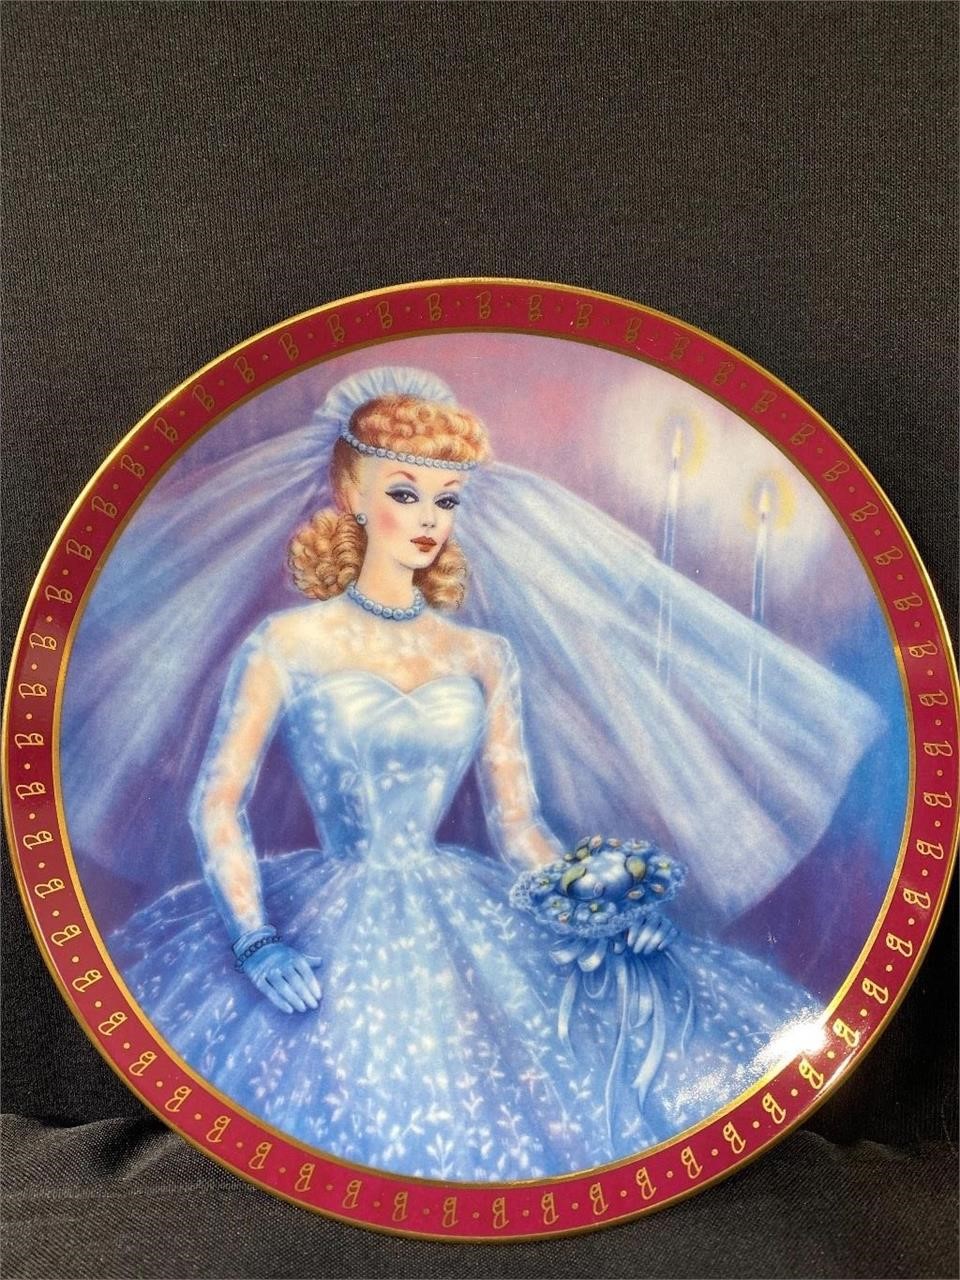 Barbie's/Collectible Dolls/Collectible Plates